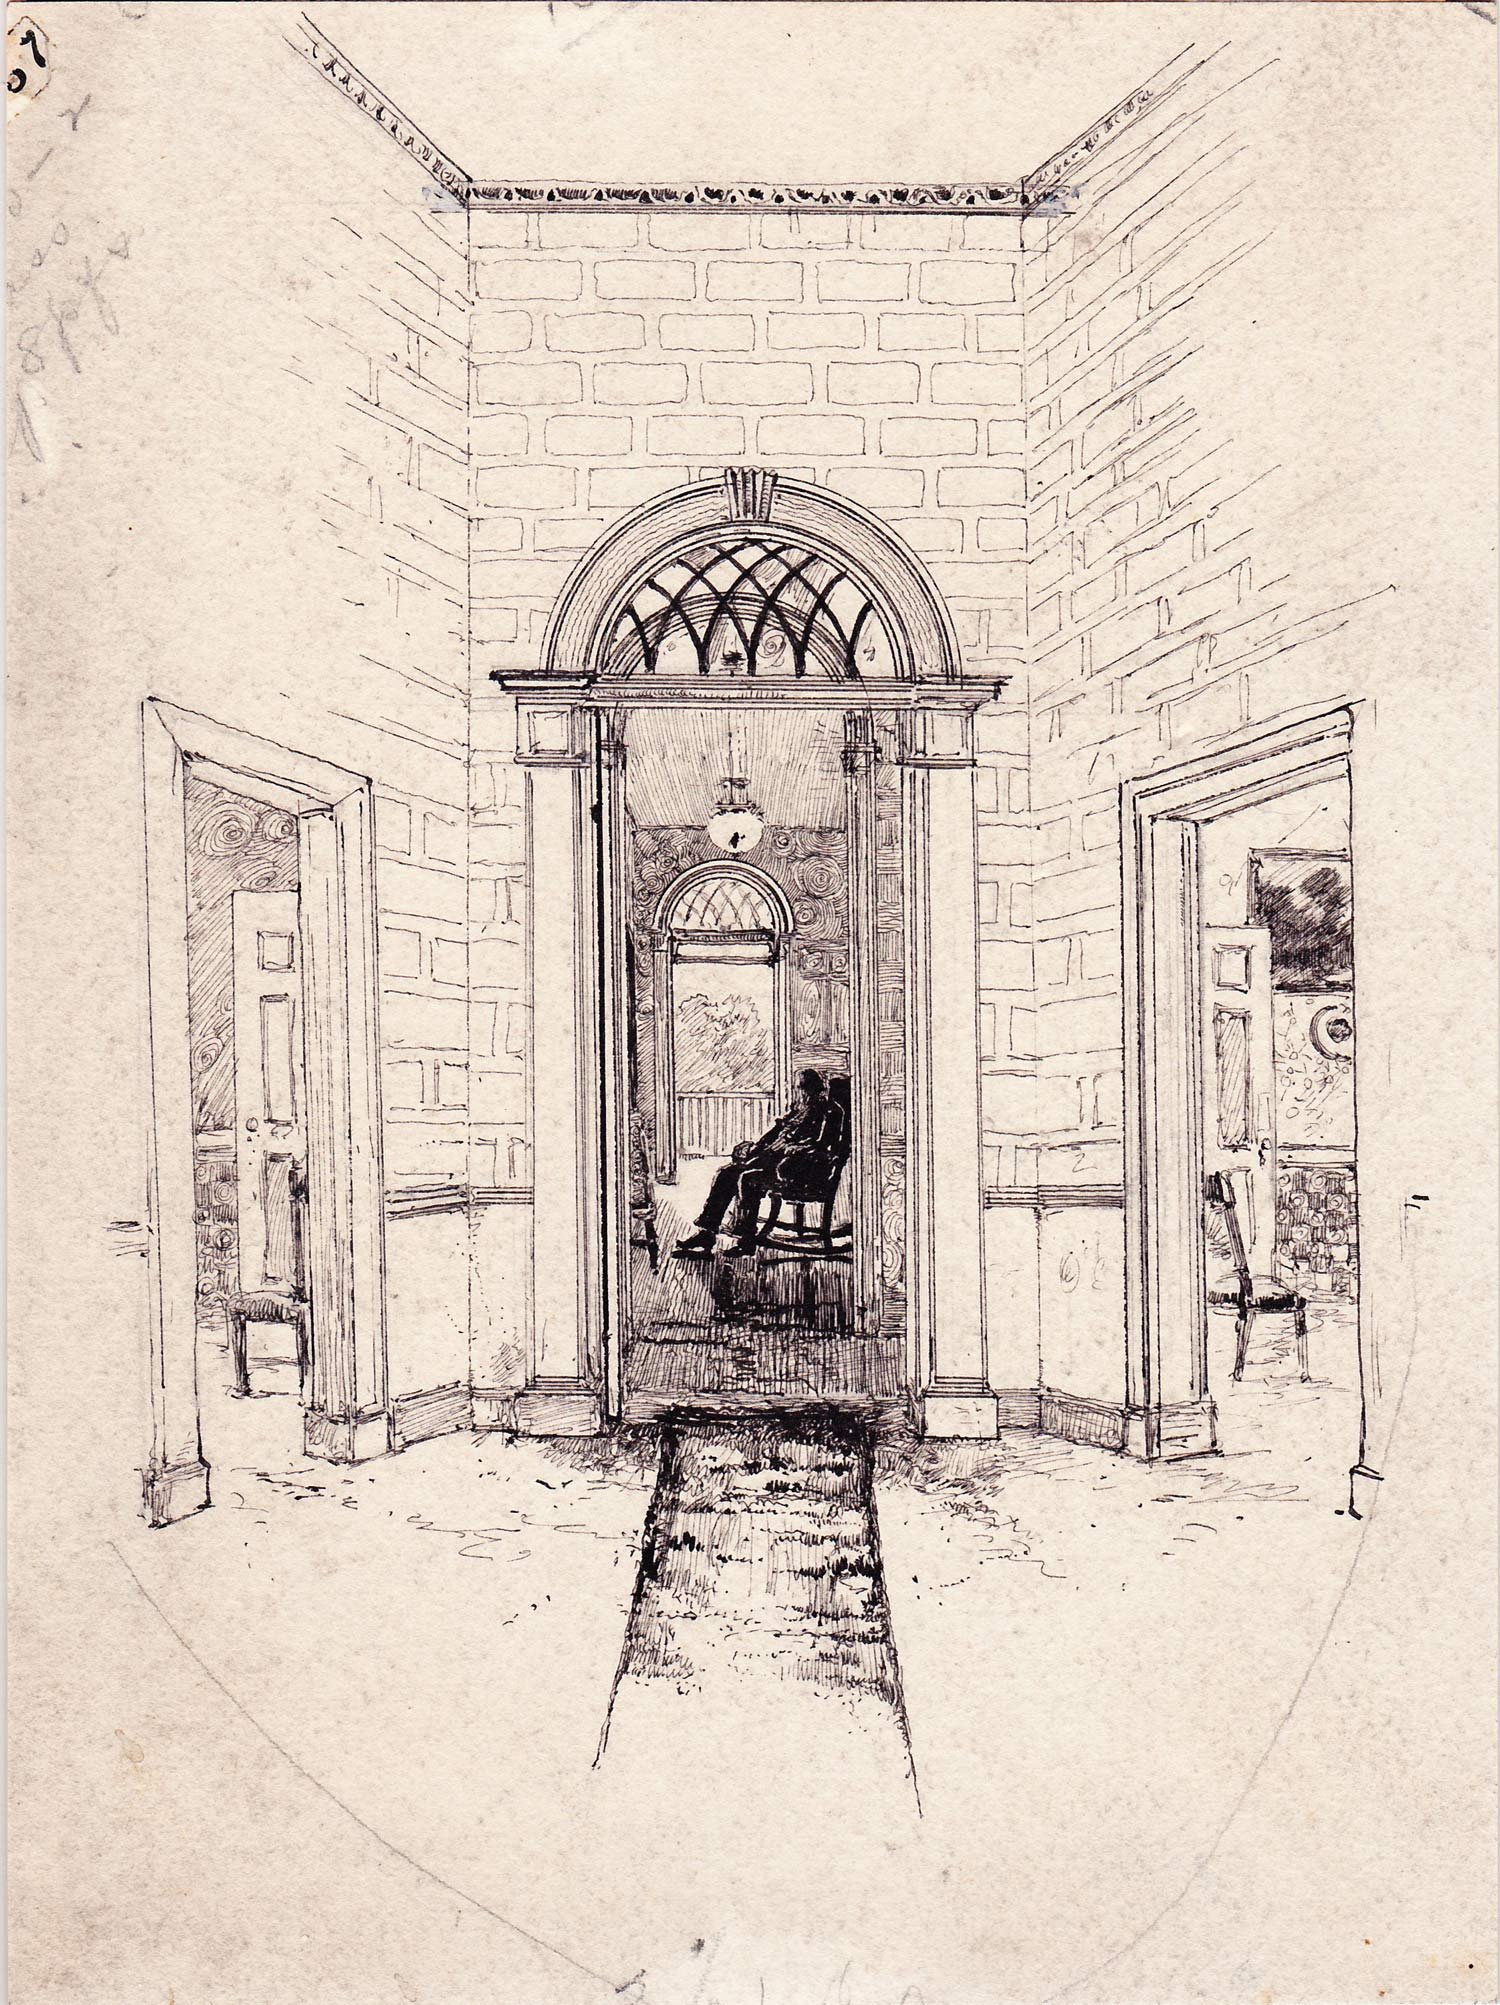   Henry Fenn (1838-1911)   Hallway of the Speed Homestead  1886, ink on paper 10” x 7 1/4”  “Abraham Lincoln,” The Century Magazine,  January 1887, pg. 385 